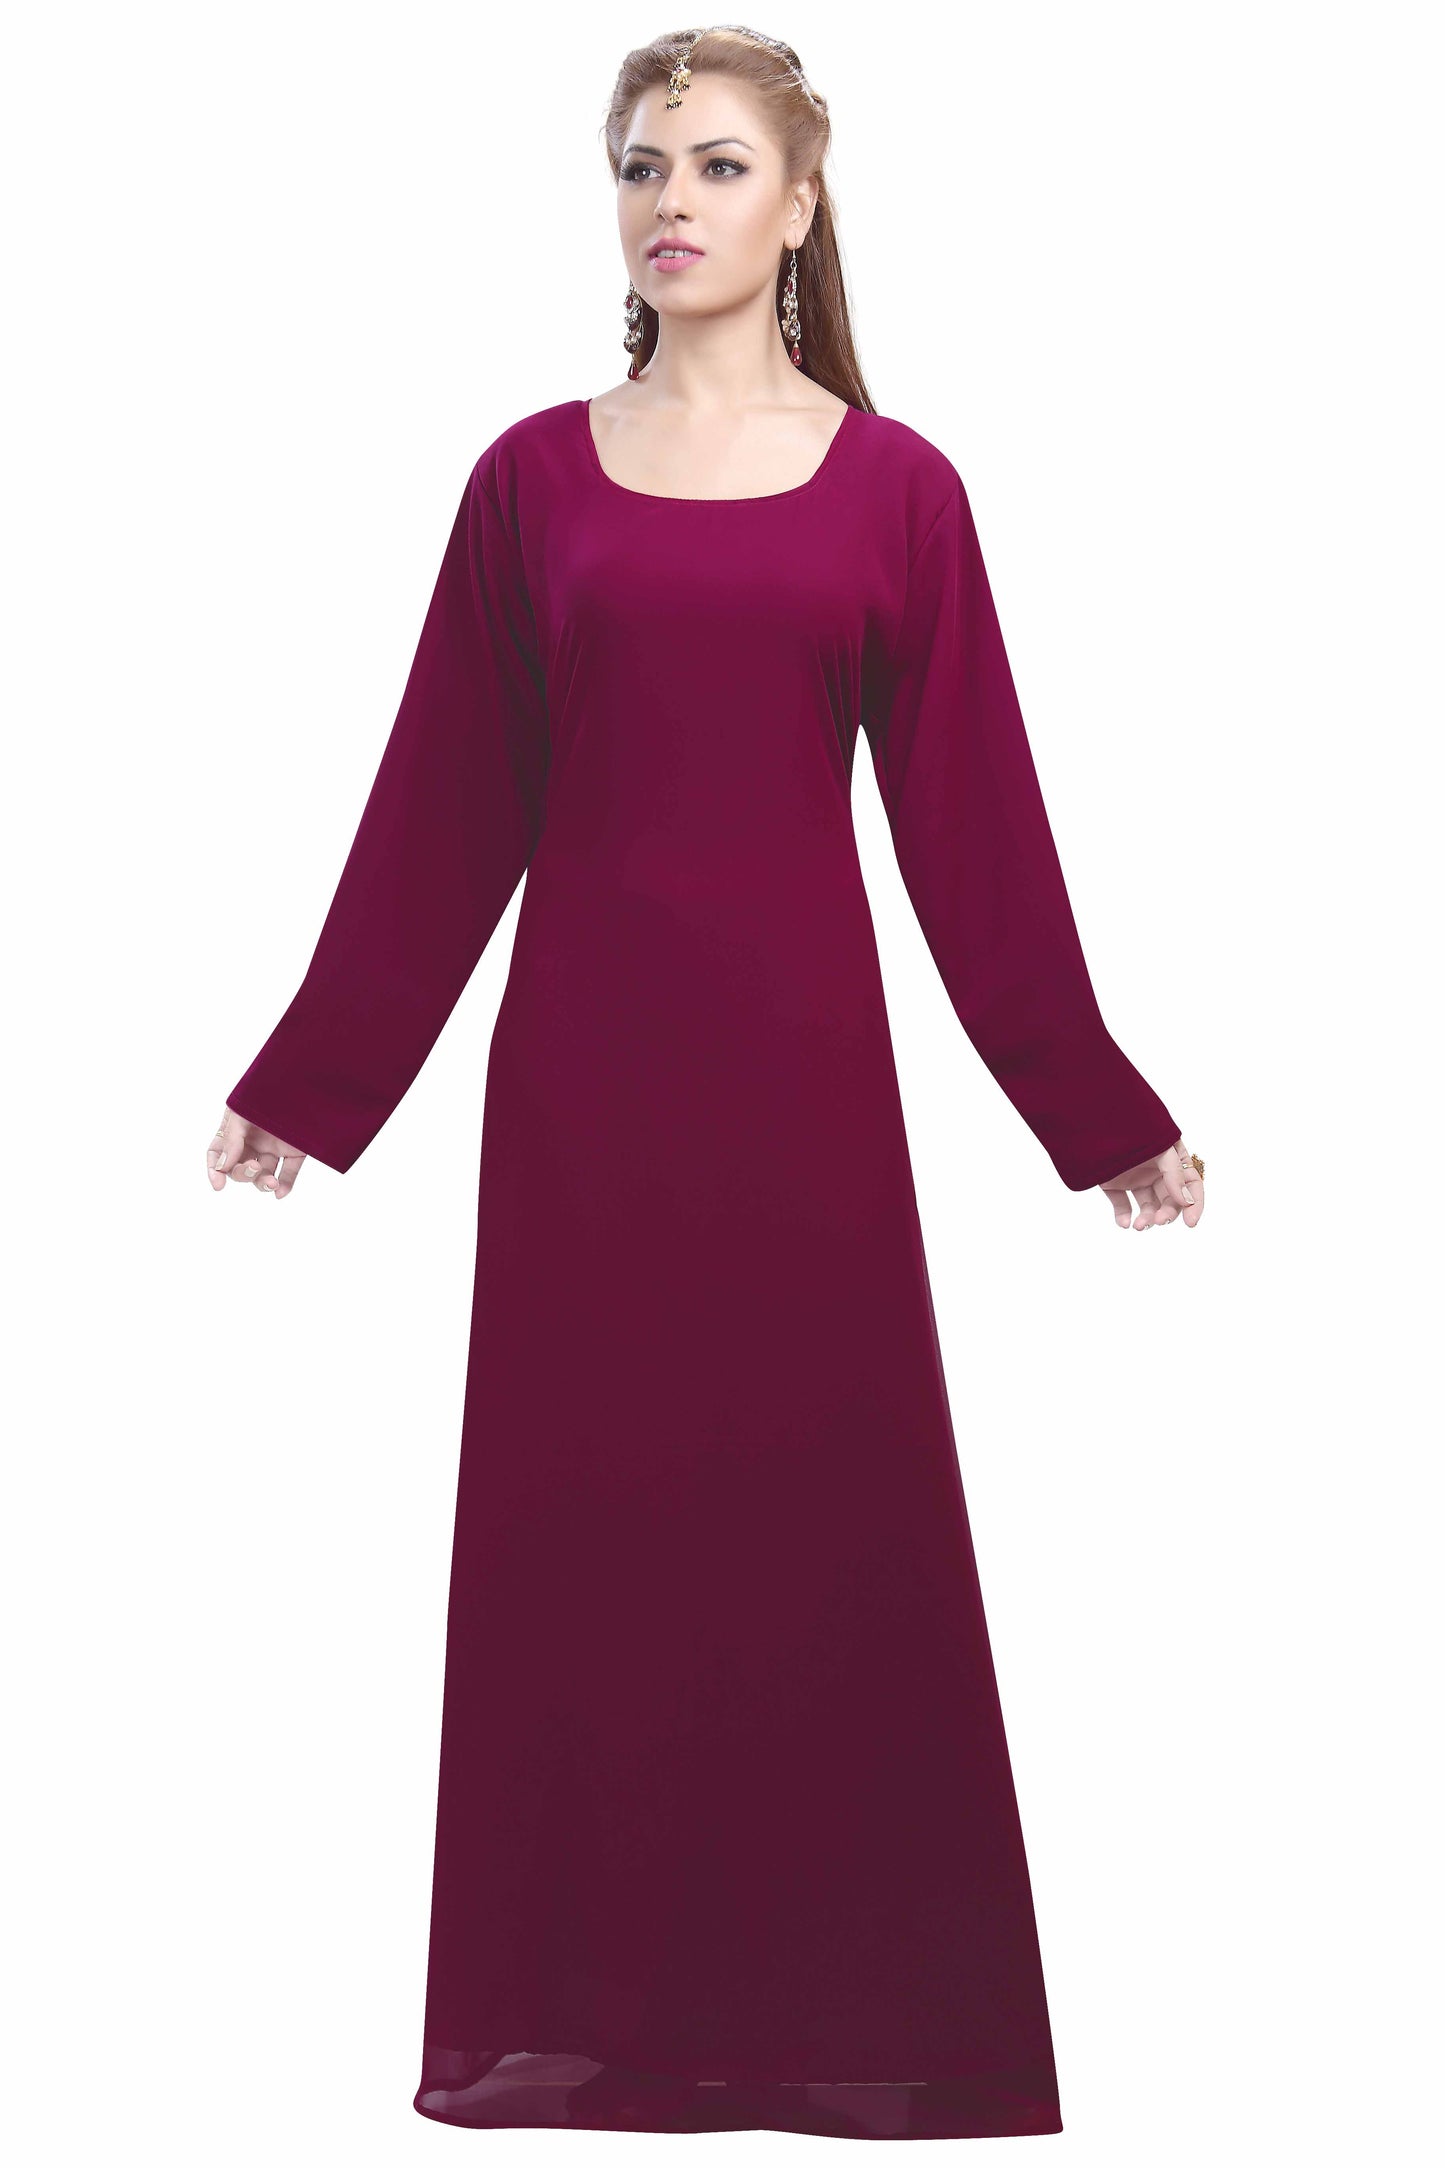 Best Selling | $39 - $52 - Maroon Plain Indian Gown and Maroon Plain  Designer Gown Online Shopping